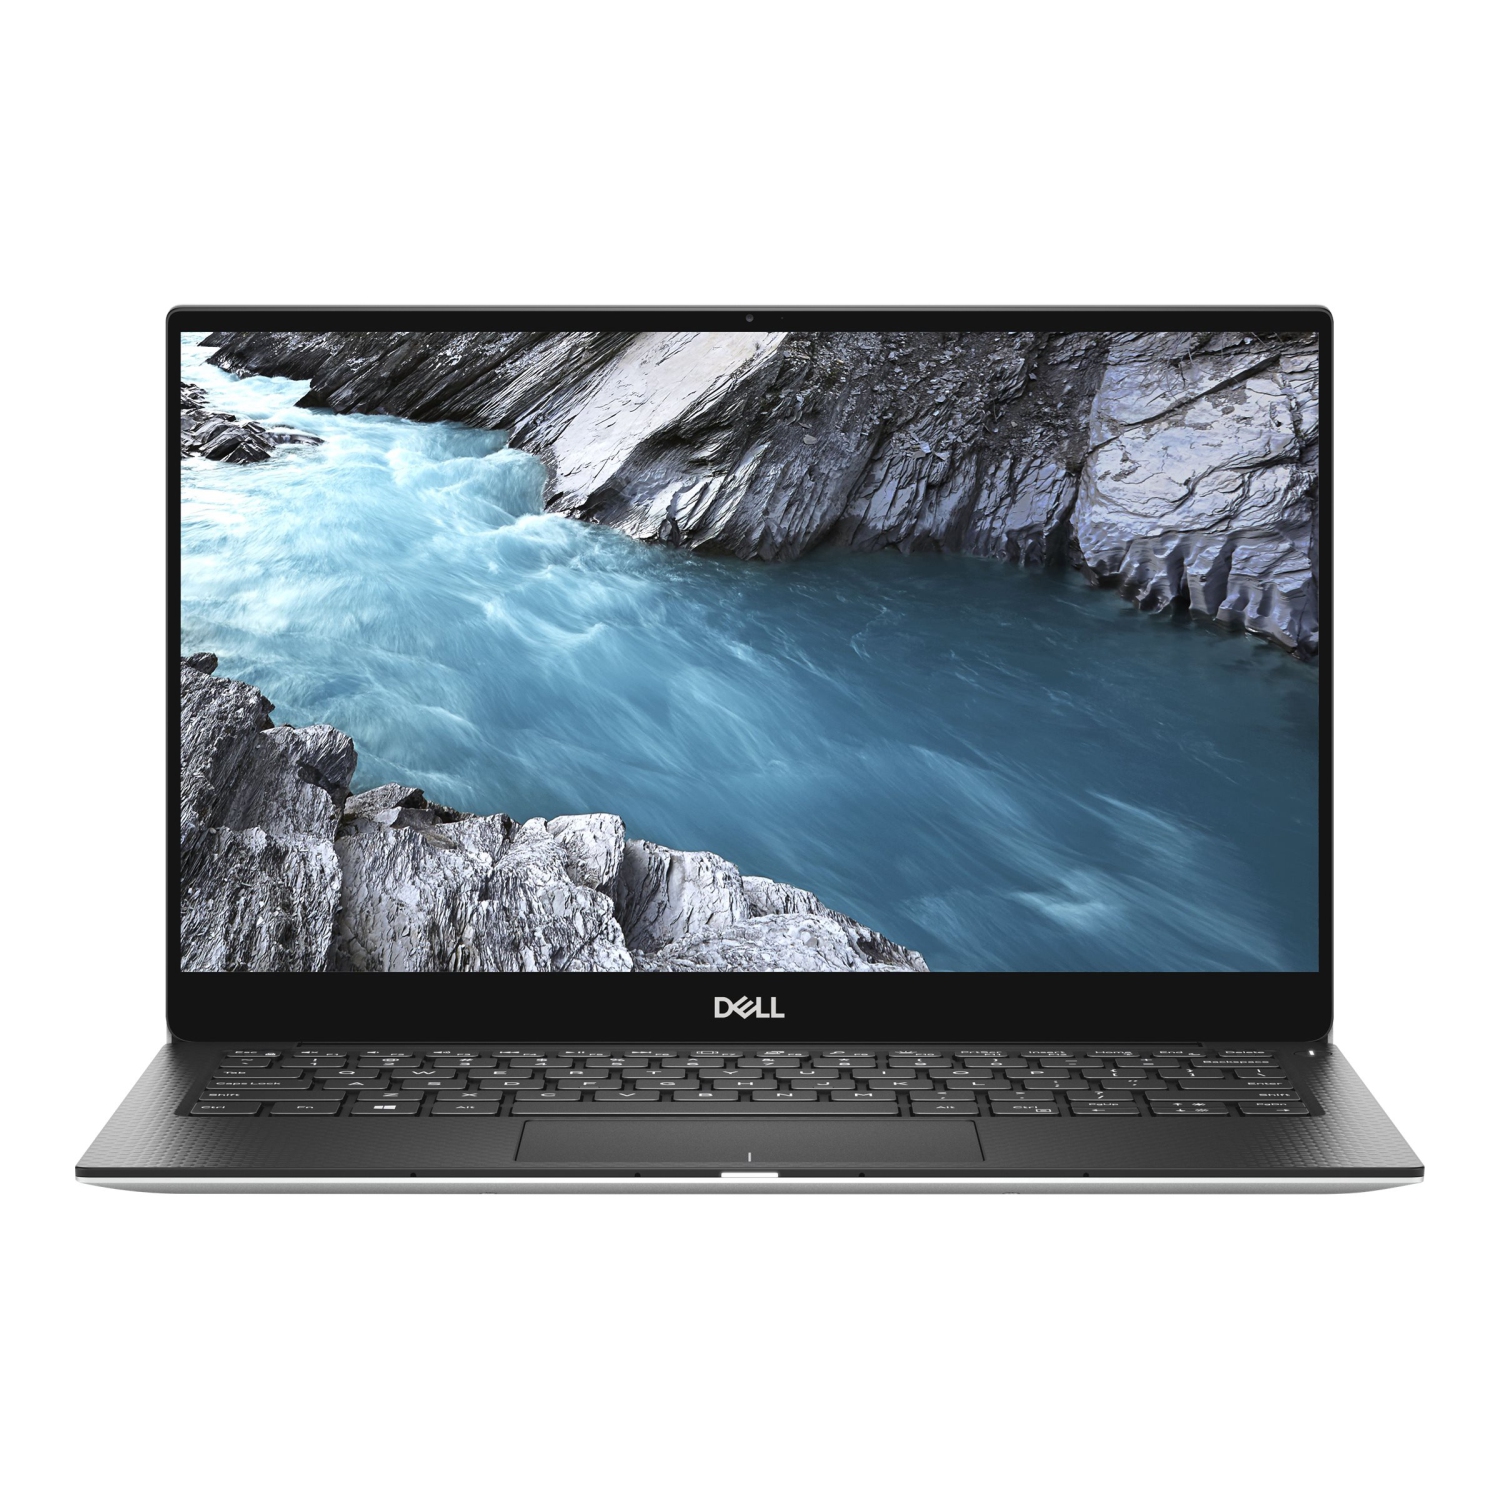 Refurbished (Excellent) - Dell XPS 13 7390 13" UHD Touchscreen Laptop (Intel Core i7-10710U / 2TB SSD / 16GB RAM / Win 11 Pro ) - Certified Refurbished